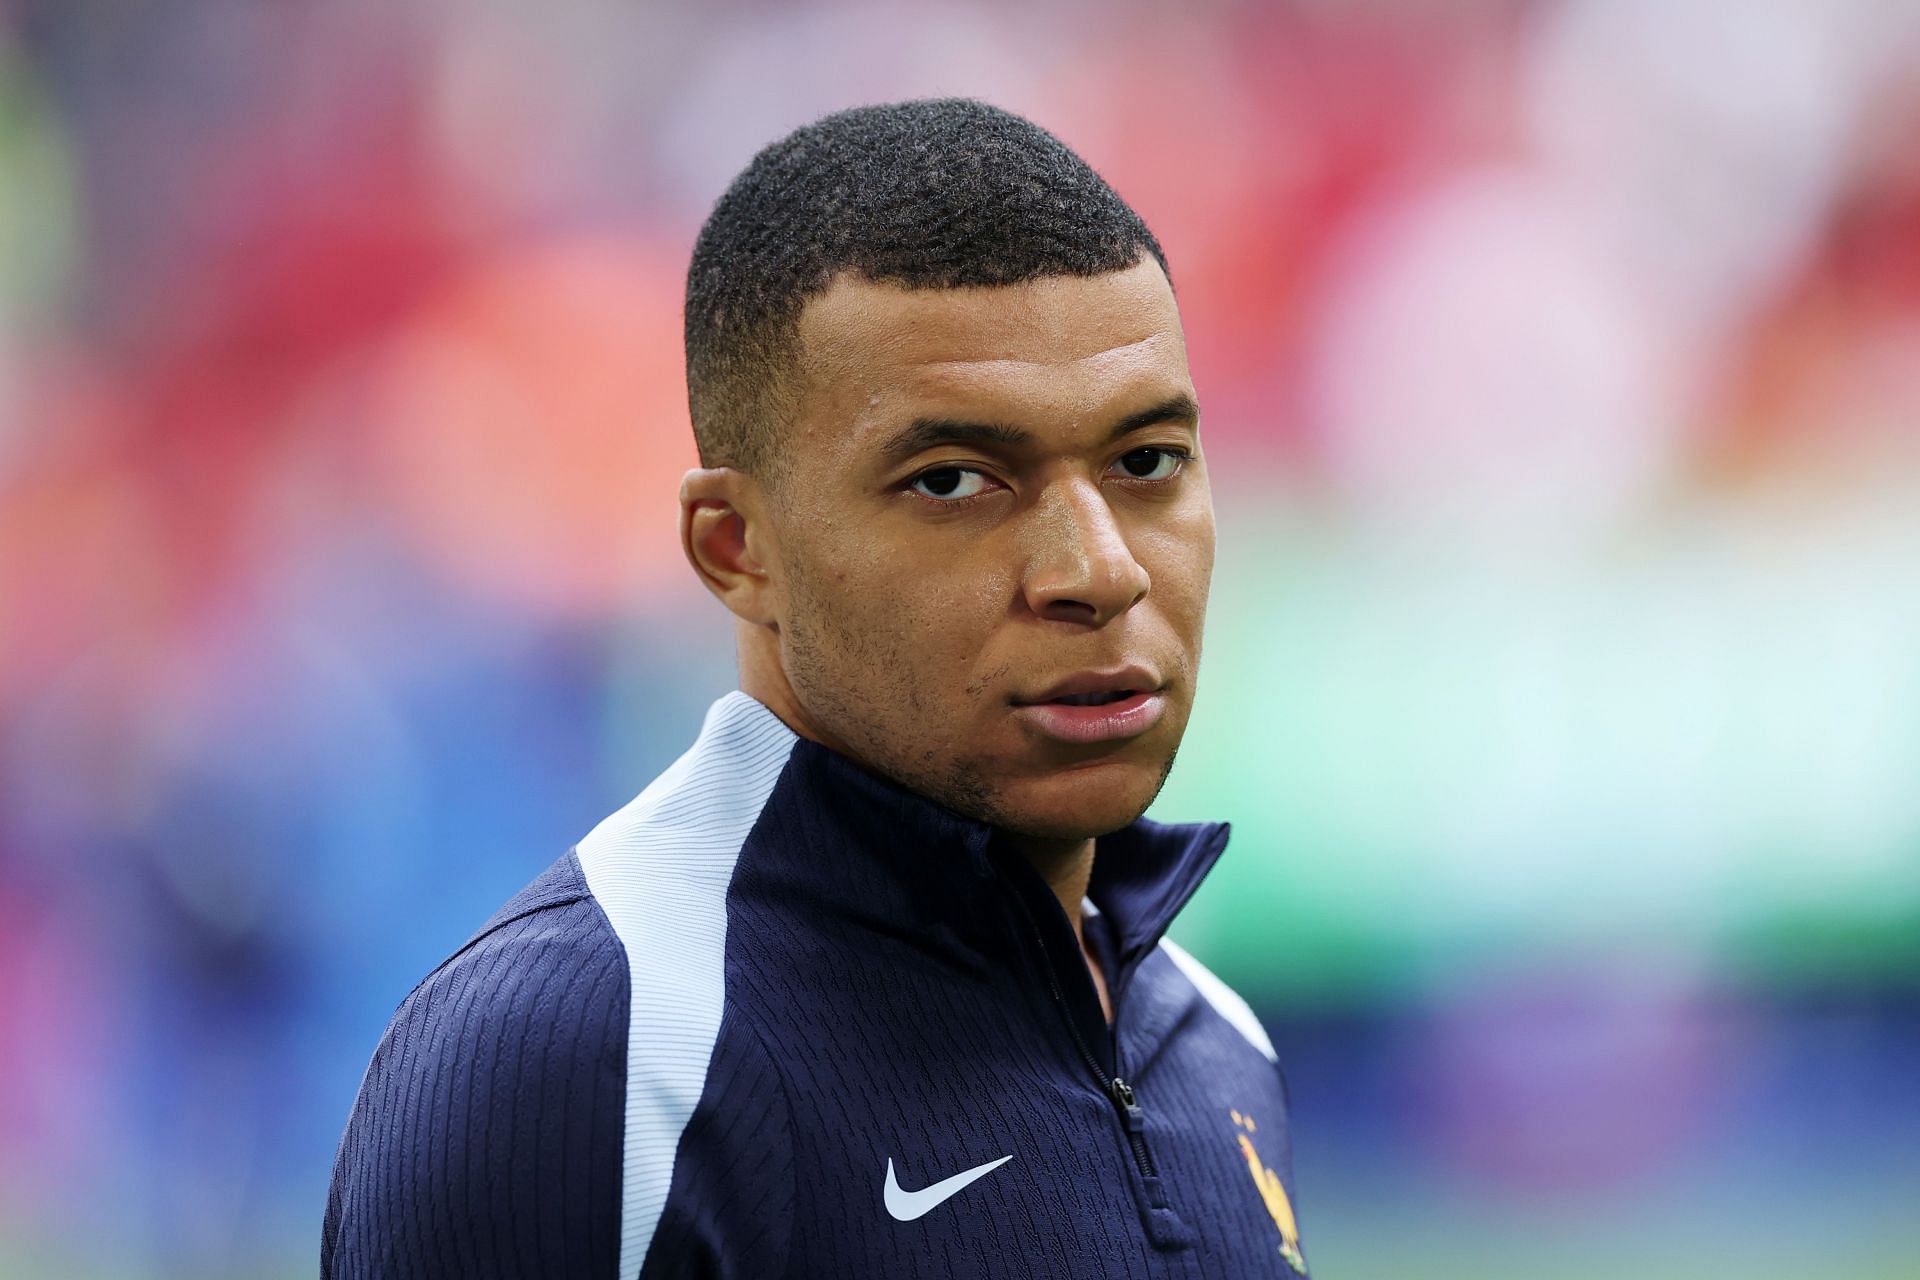 When will Kylian Mbappe be presented as a Real Madrid player? Report provides key details regarding event